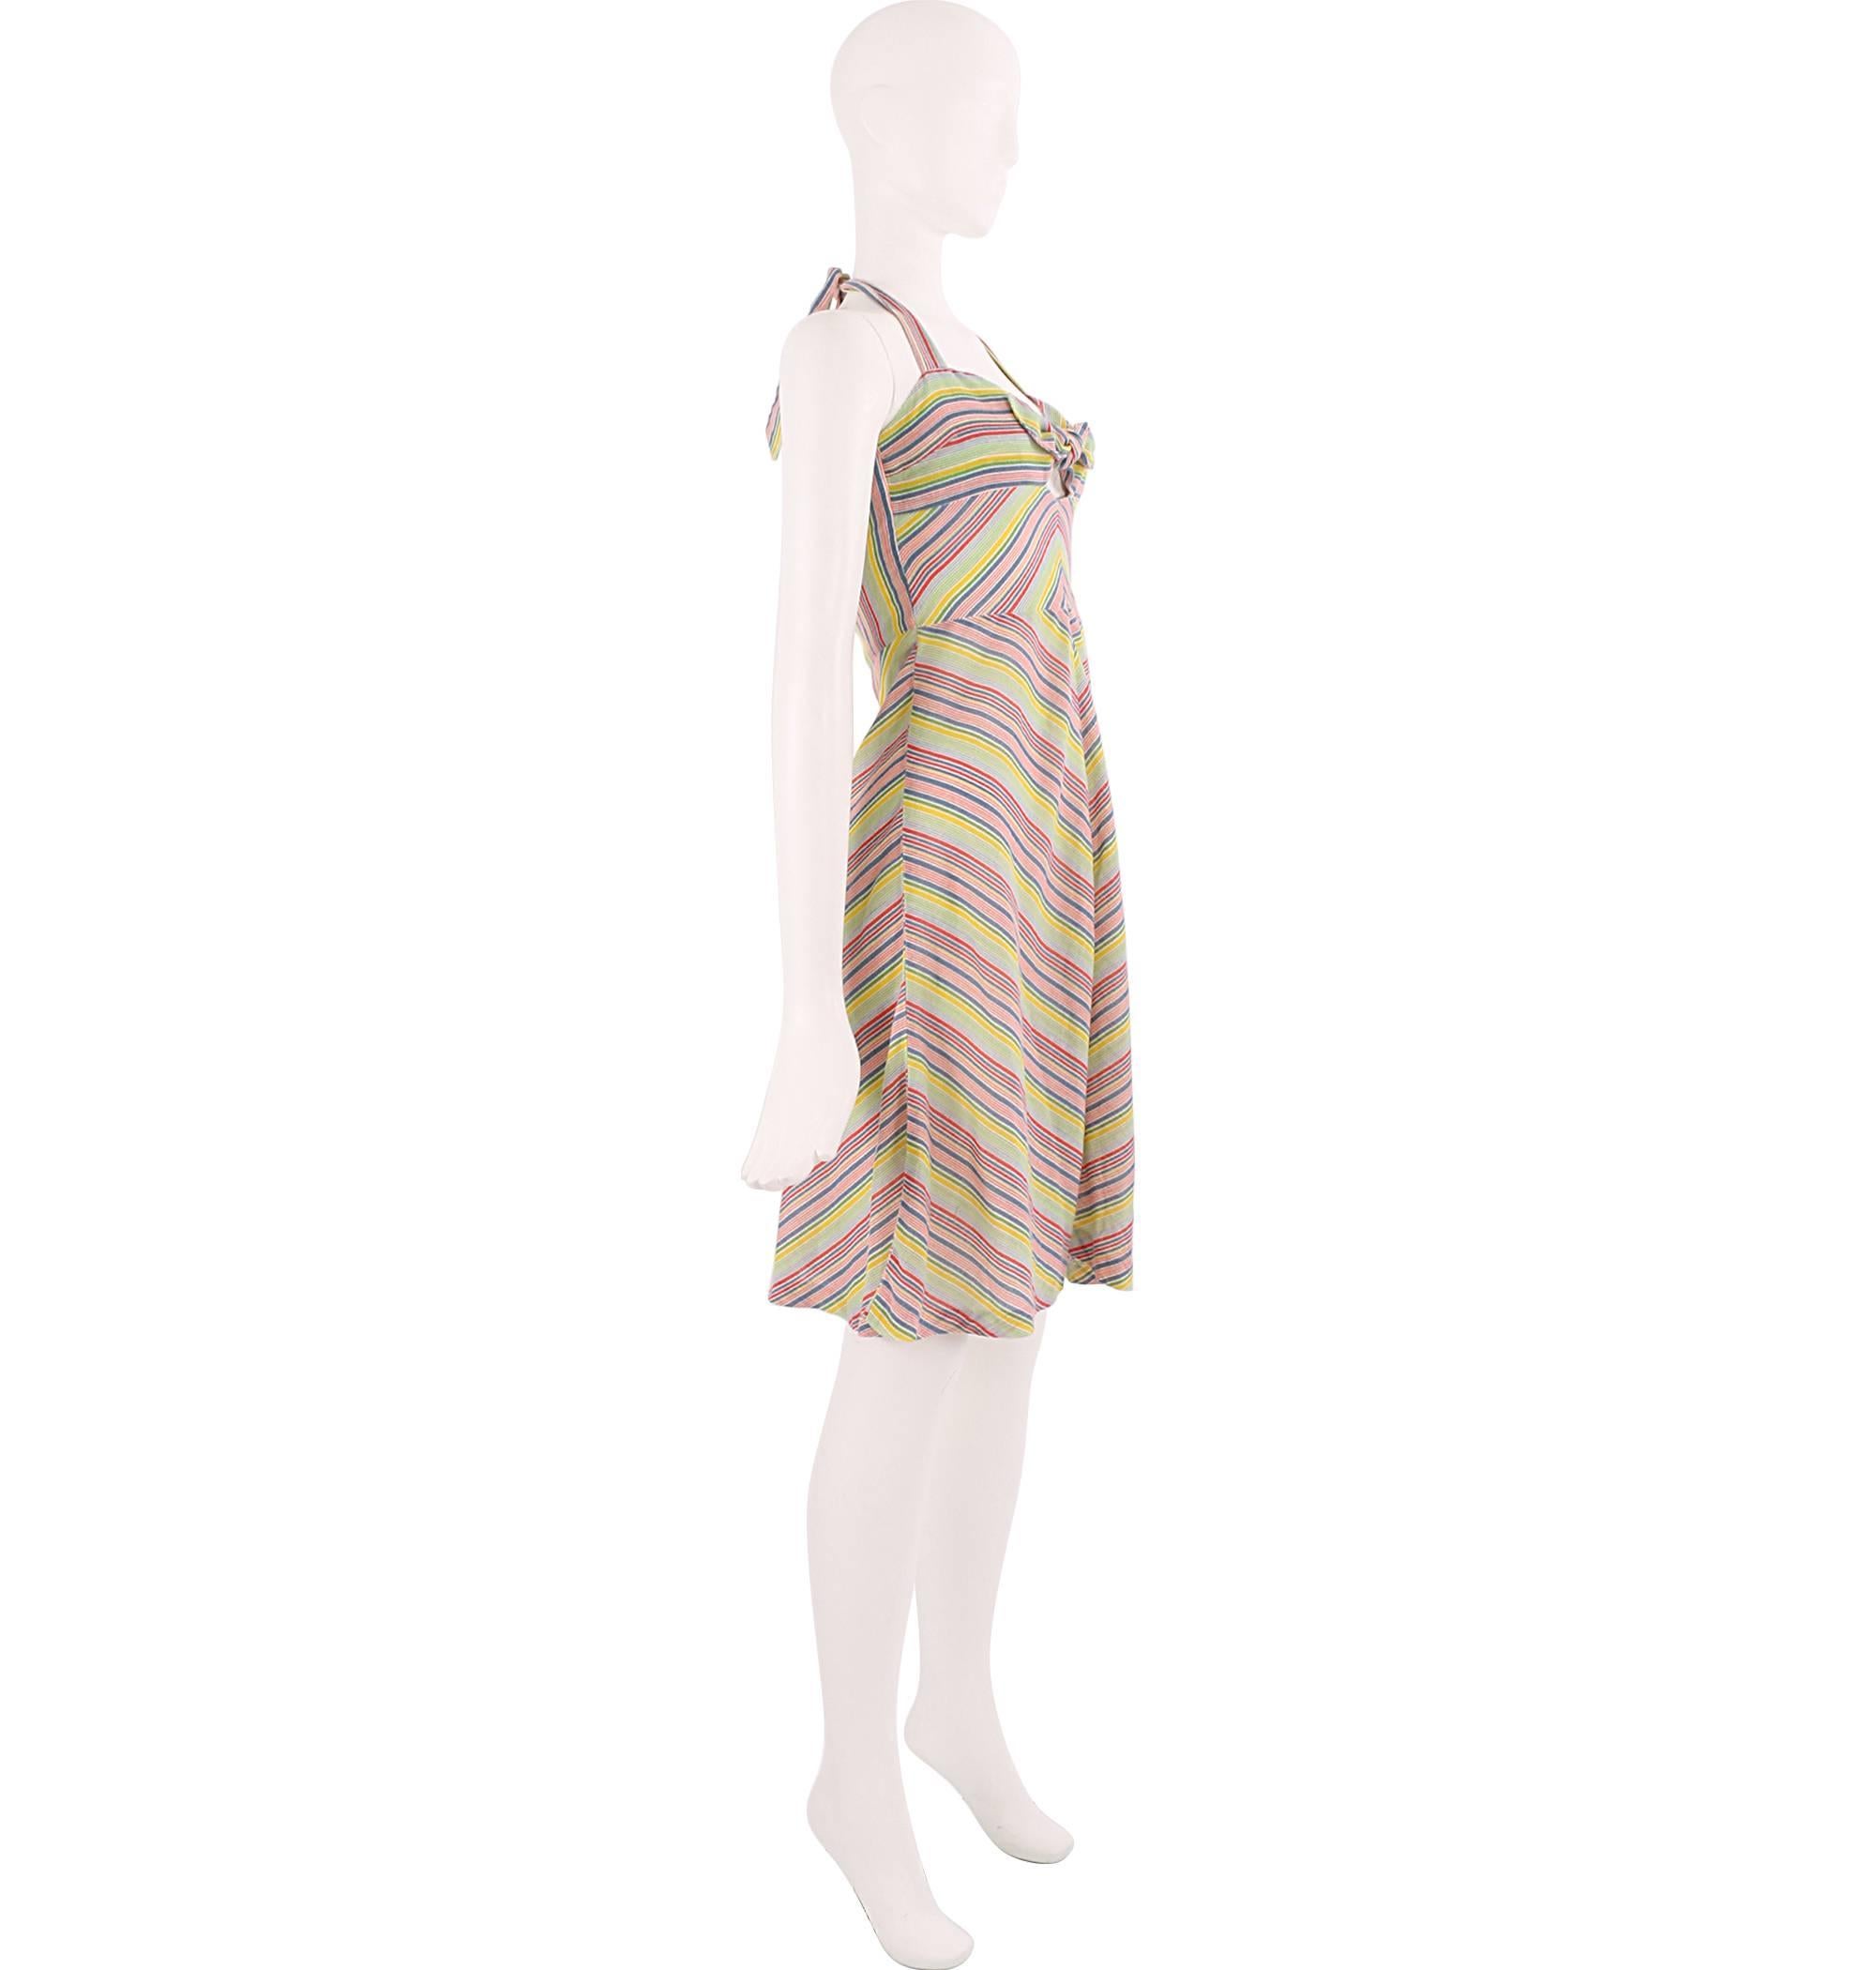 Fun 1970s halterneck tie dress featuring a bright rainbow coloured chevron striped print and cute central bow detailing. If you're looking for a vibrant and pretty staple summer dress then this is the piece for you. Sweet and sassy, the garment is